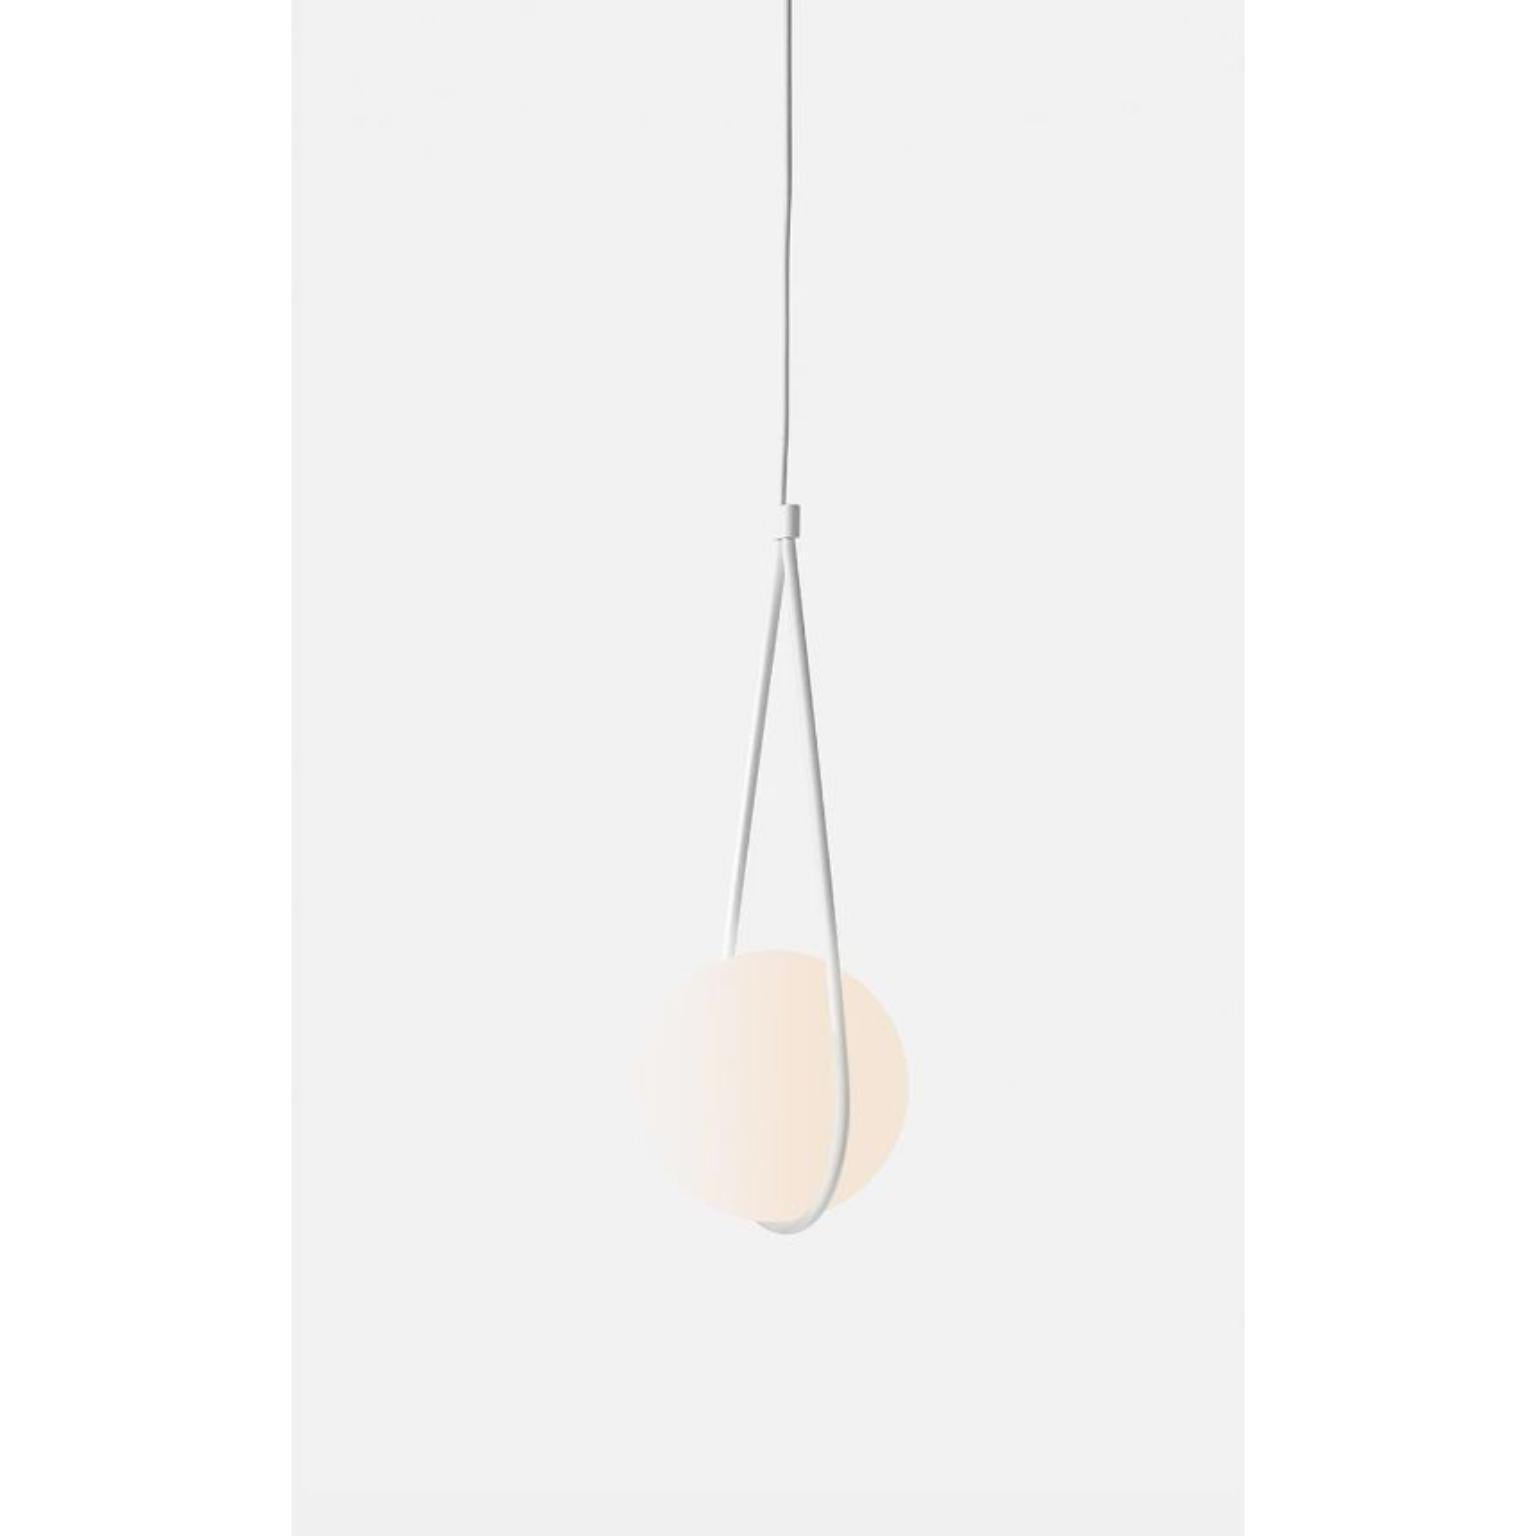 White Corda Pendant Lamp by Wentz
Dimensions: D 20 x W 22 x H 55 cm
Materials: Aluminum, Blown Glass.


WEIGHT: 1,2kg / 2,6 lbs
Colors: Black, White
LIGHT SOURCE: Built-in LED. 150lm. 2700K. 80 CRI.
DIMMING ELV @ 120VAC.
VOLTAGE: 120-277V -